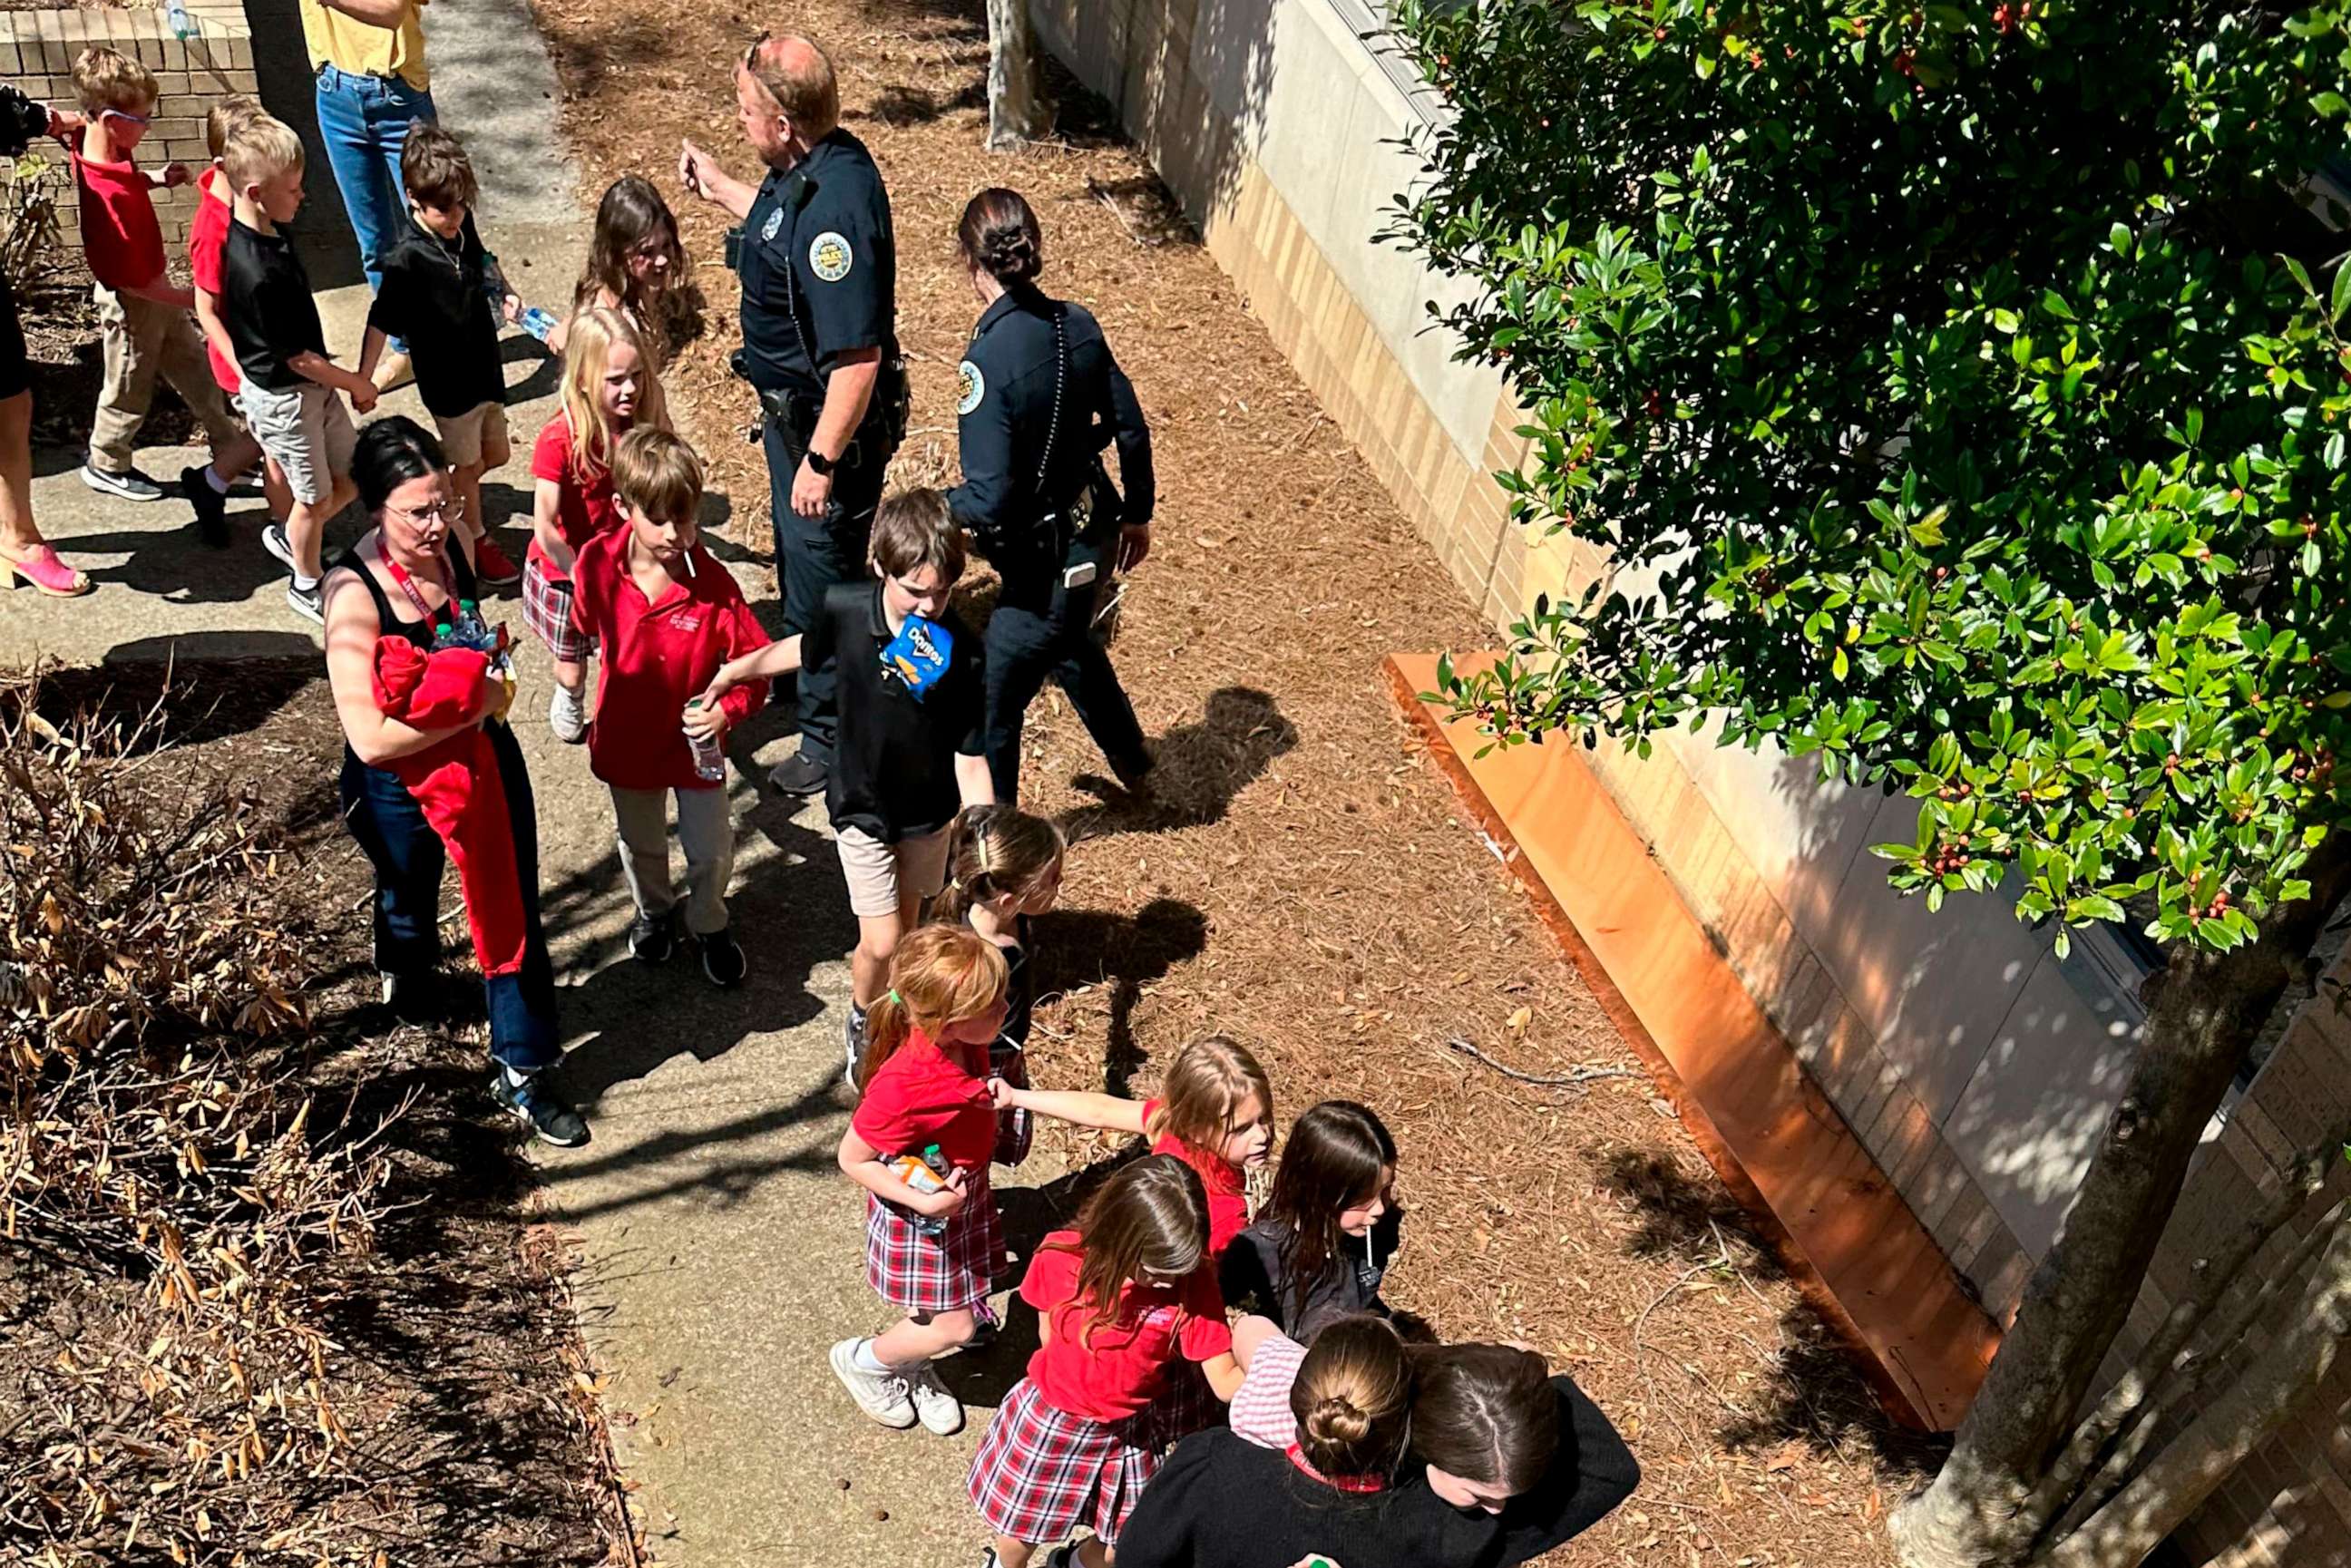 PHOTO: Children from The Covenant School, a private Christian school in Nashville, Tenn., hold hands as they are taken to a reunification site at the Woodmont Baptist Church after a shooting at their school, Mar. 27, 2023.